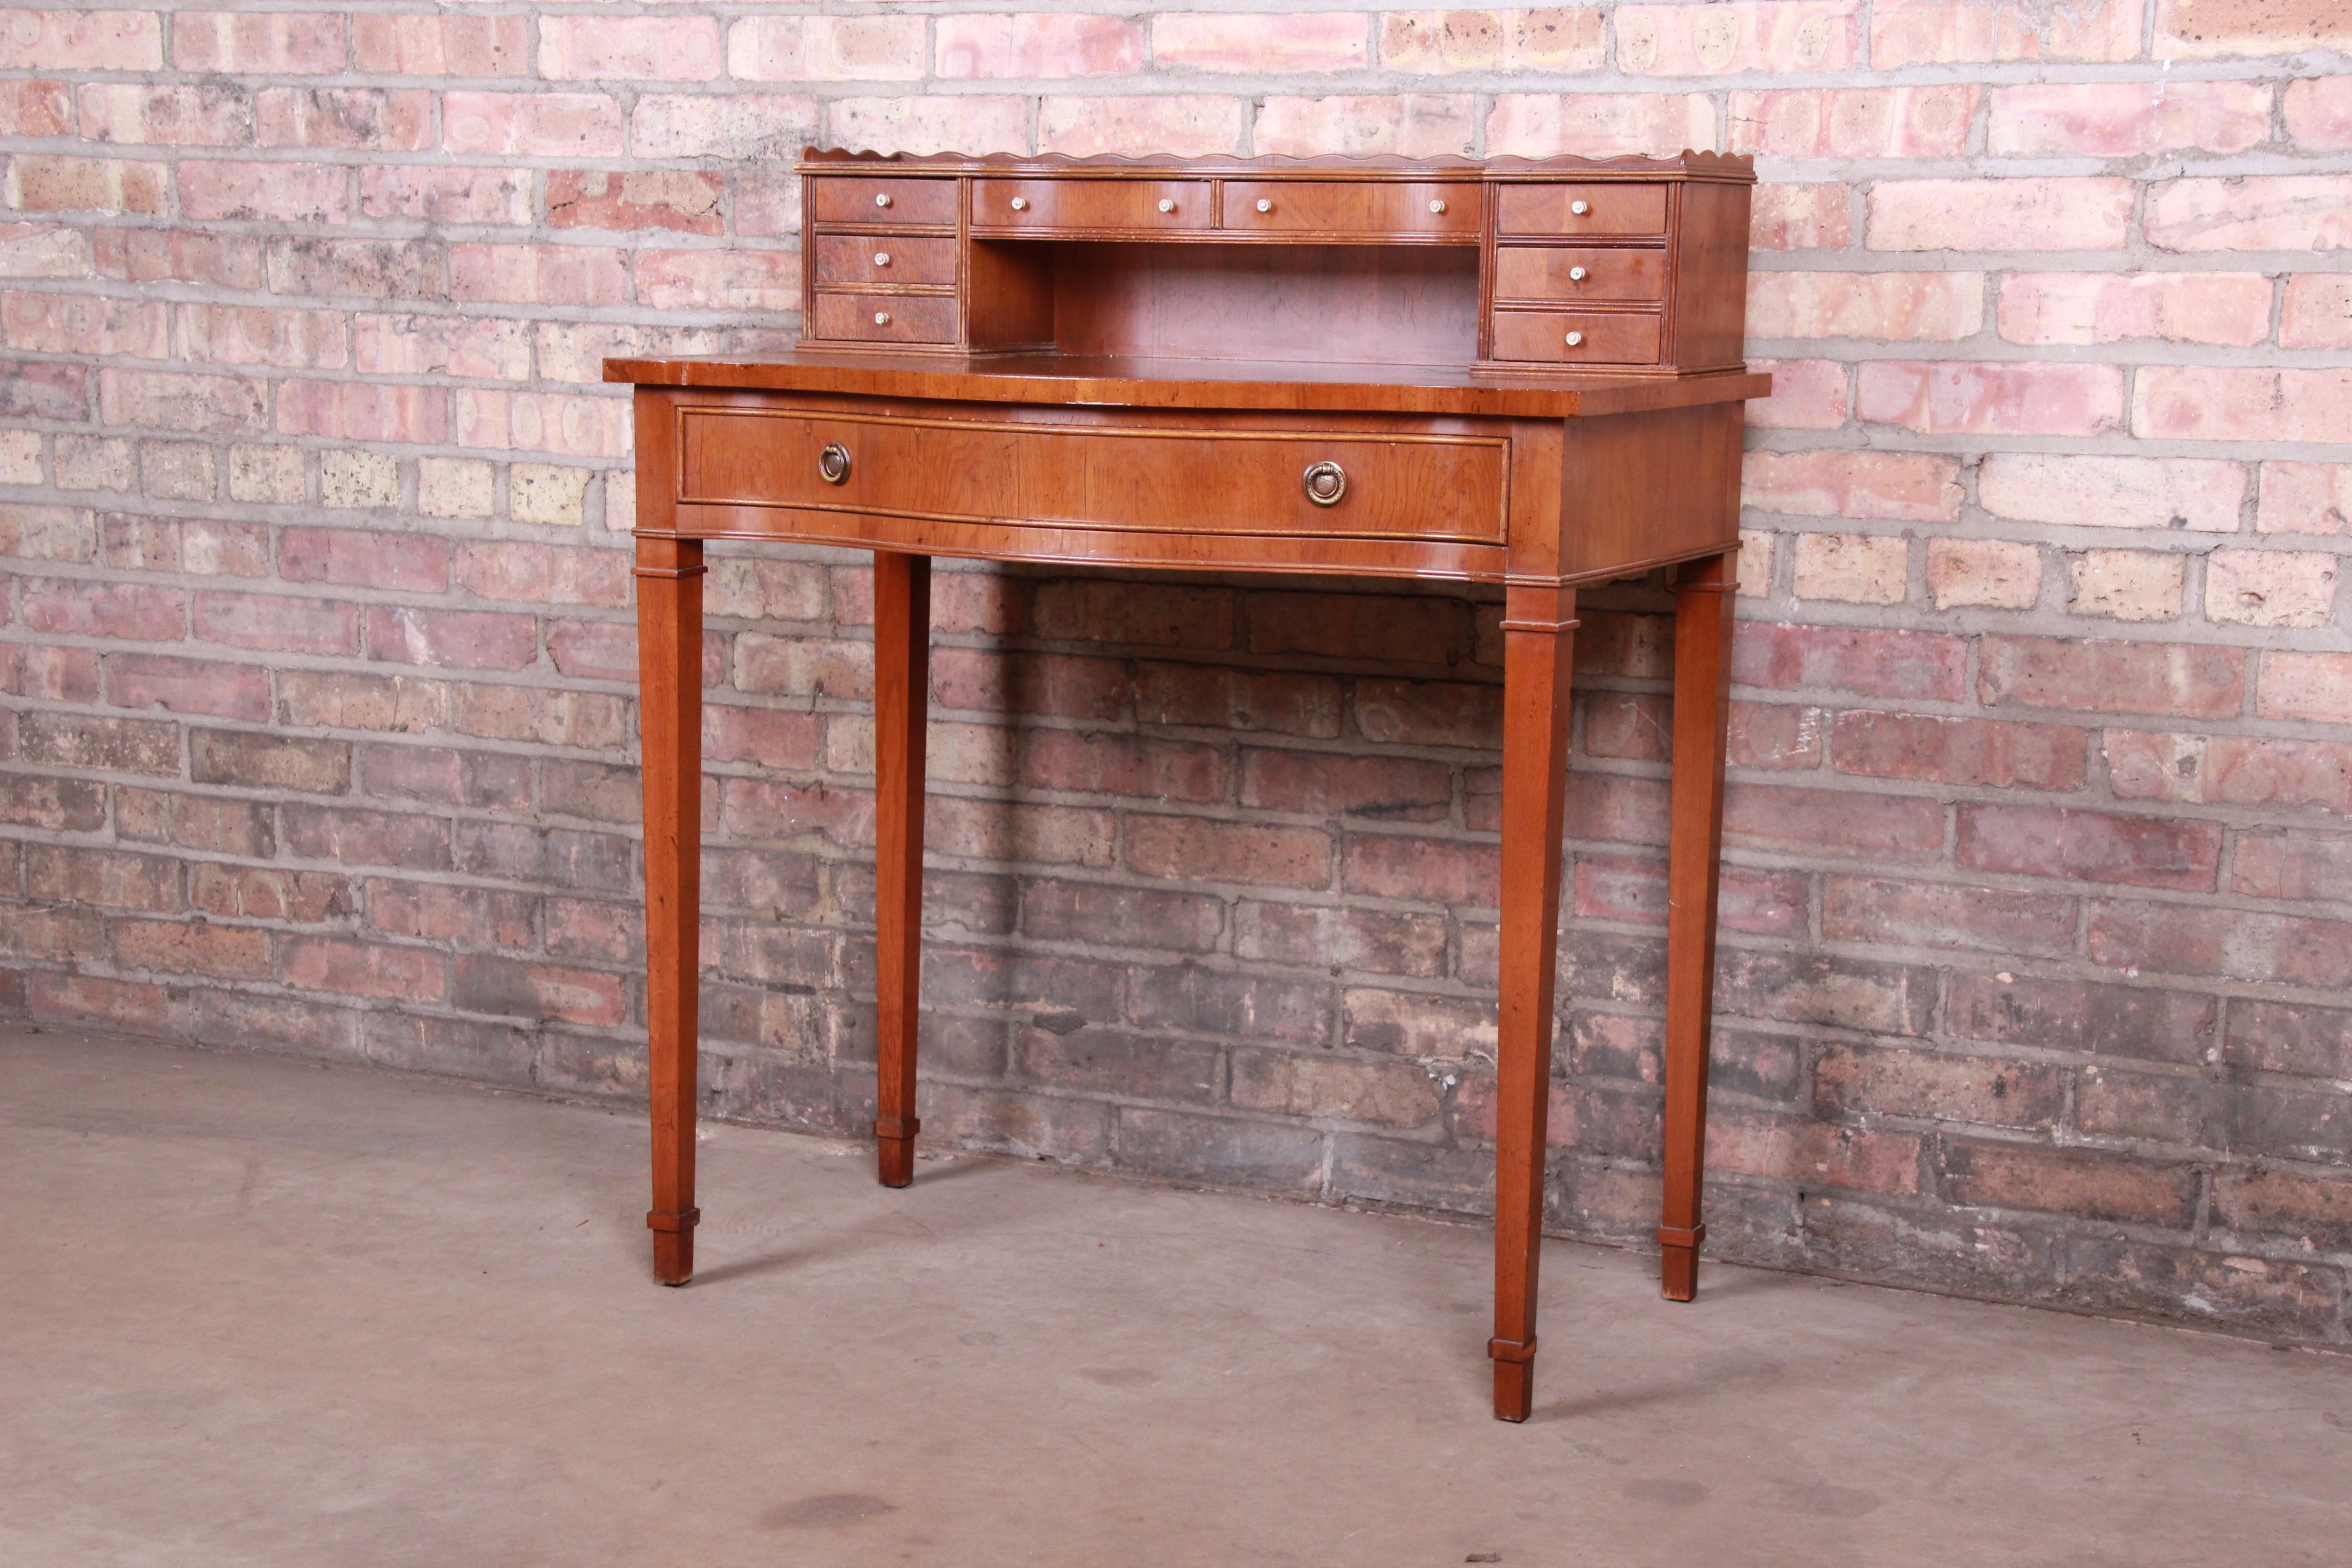 A gorgeous English Provincial style ladies writing desk

circa 1960s

Fruitwood, with tooled leather top writing surface.

Measures: 31.5